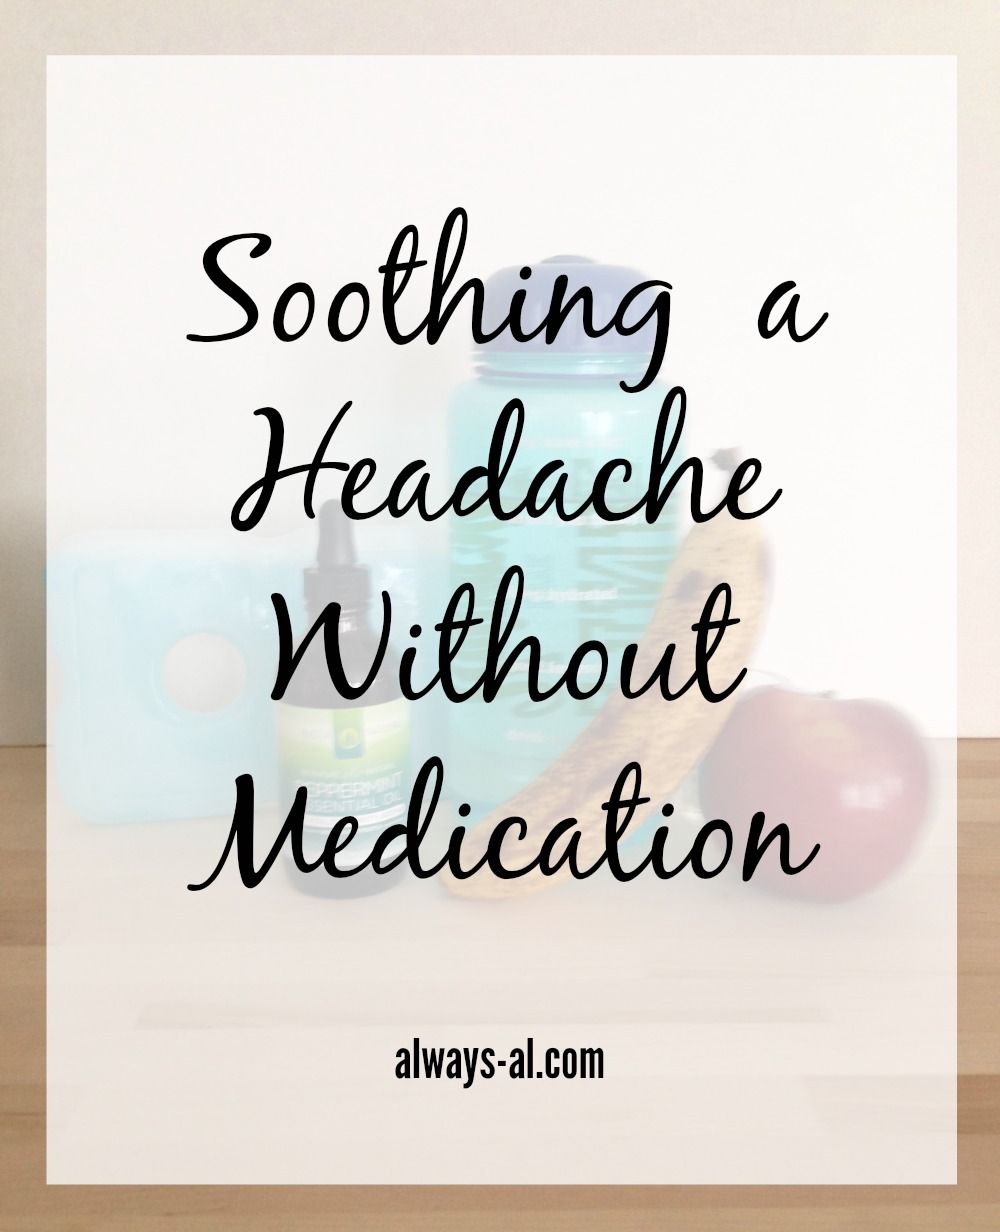 Soothing a Headache Without Medication